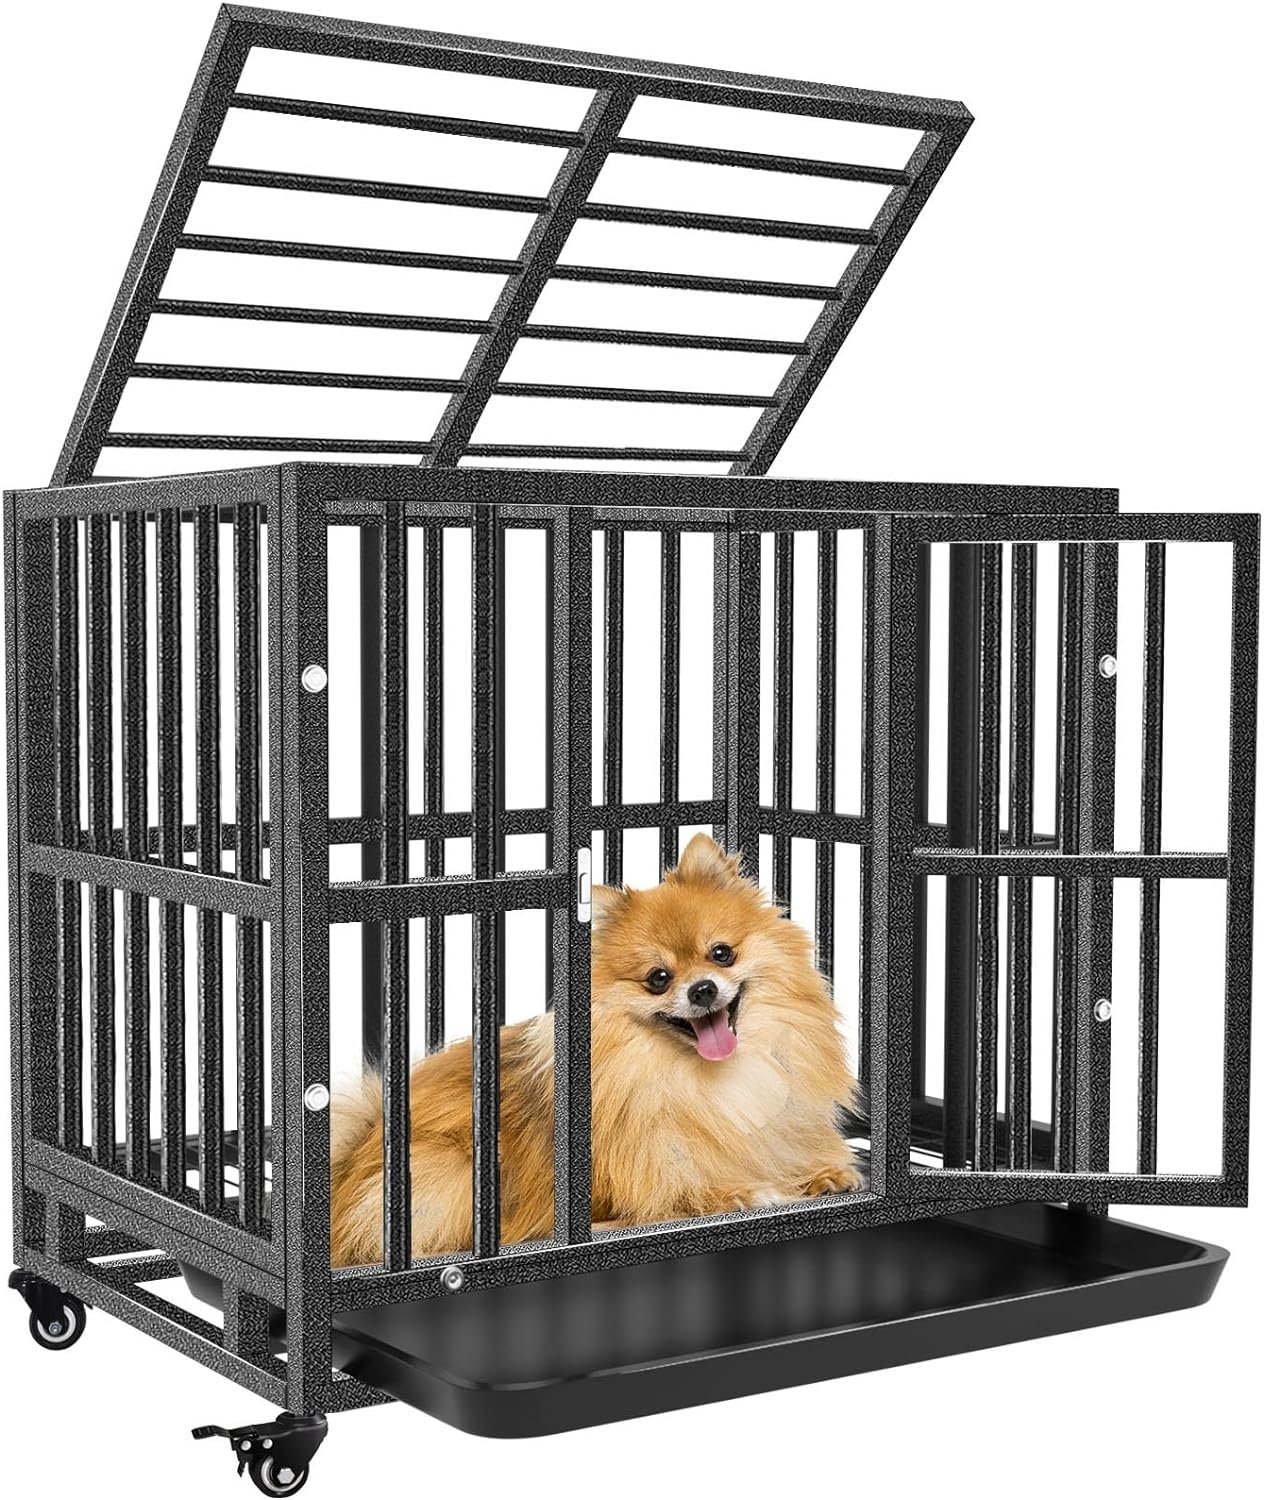 heavy duty dog crate for small dogs indestructible pet cage indooroutdoor strong metal kennel with lockable wheels doubl